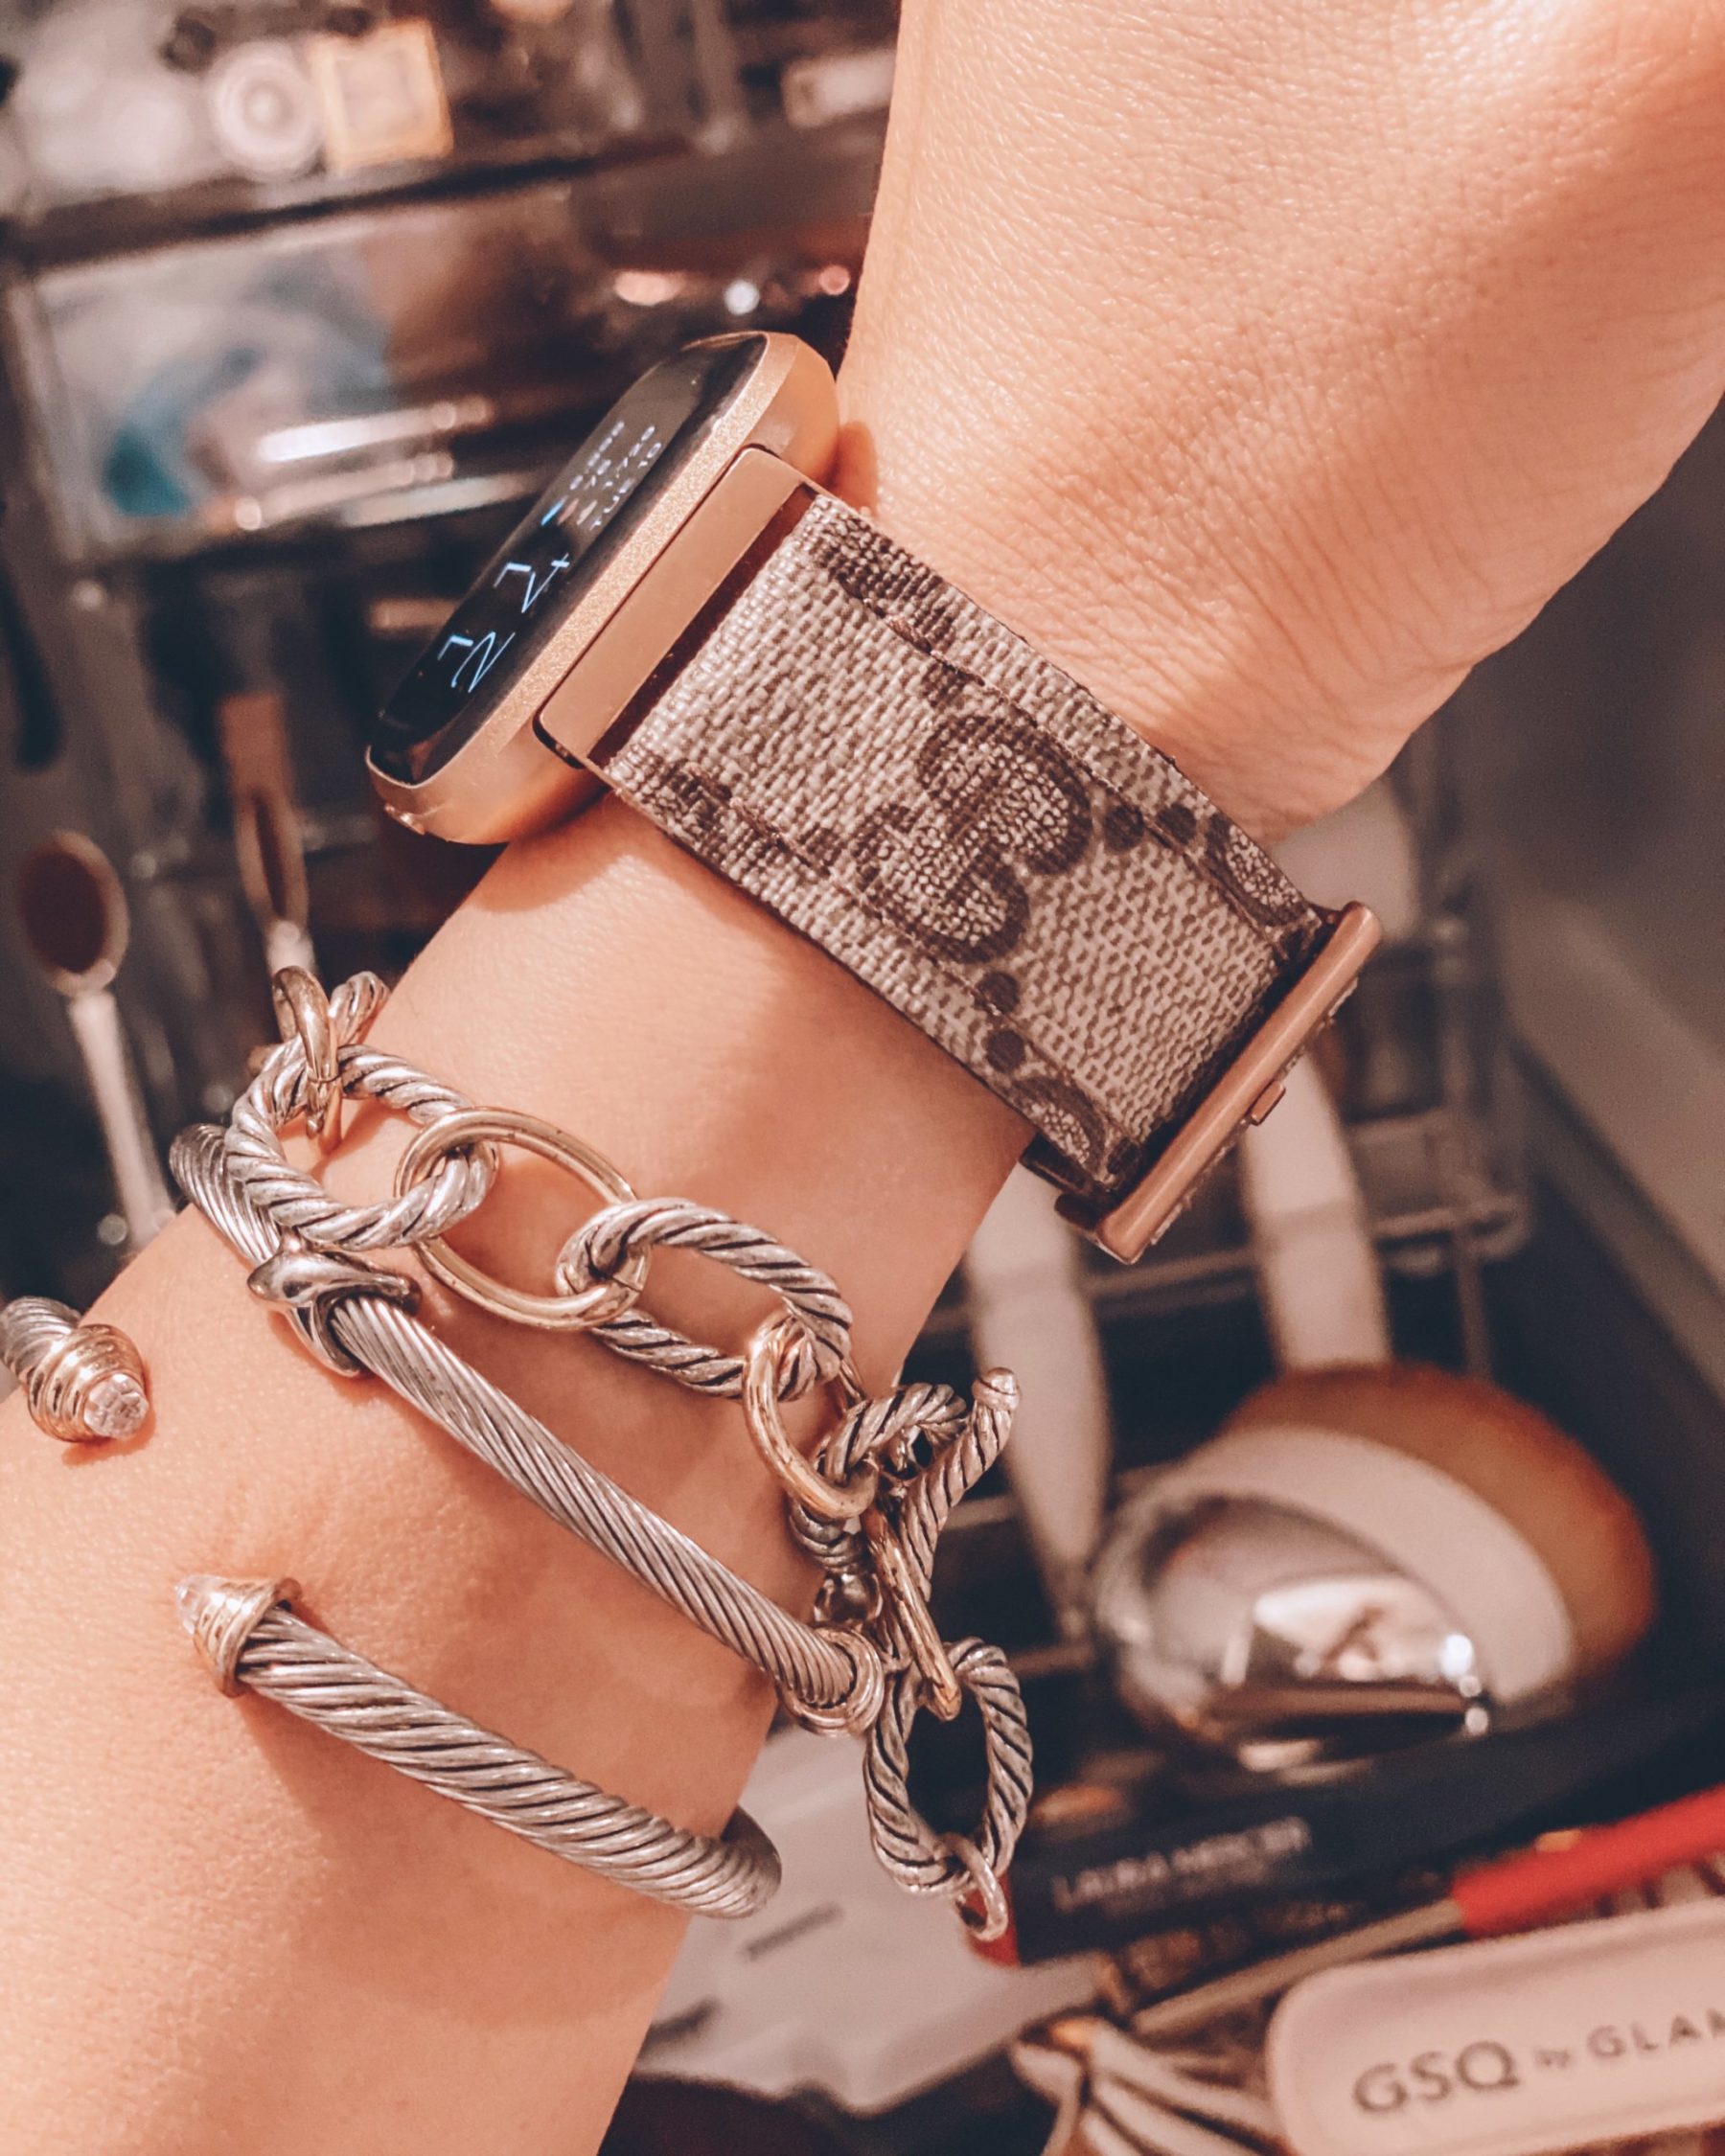 cute & little | dallas petite fashion blog | 2020 black firday cyber monday sales | sparkl bands gucci watch strap |Cyber Monday Sales by popular Dallas petite fashion blog, Cute and Little: image of a woman wearing a Gucci watch band, cable bracelet, x cuff, and gem cuff. 